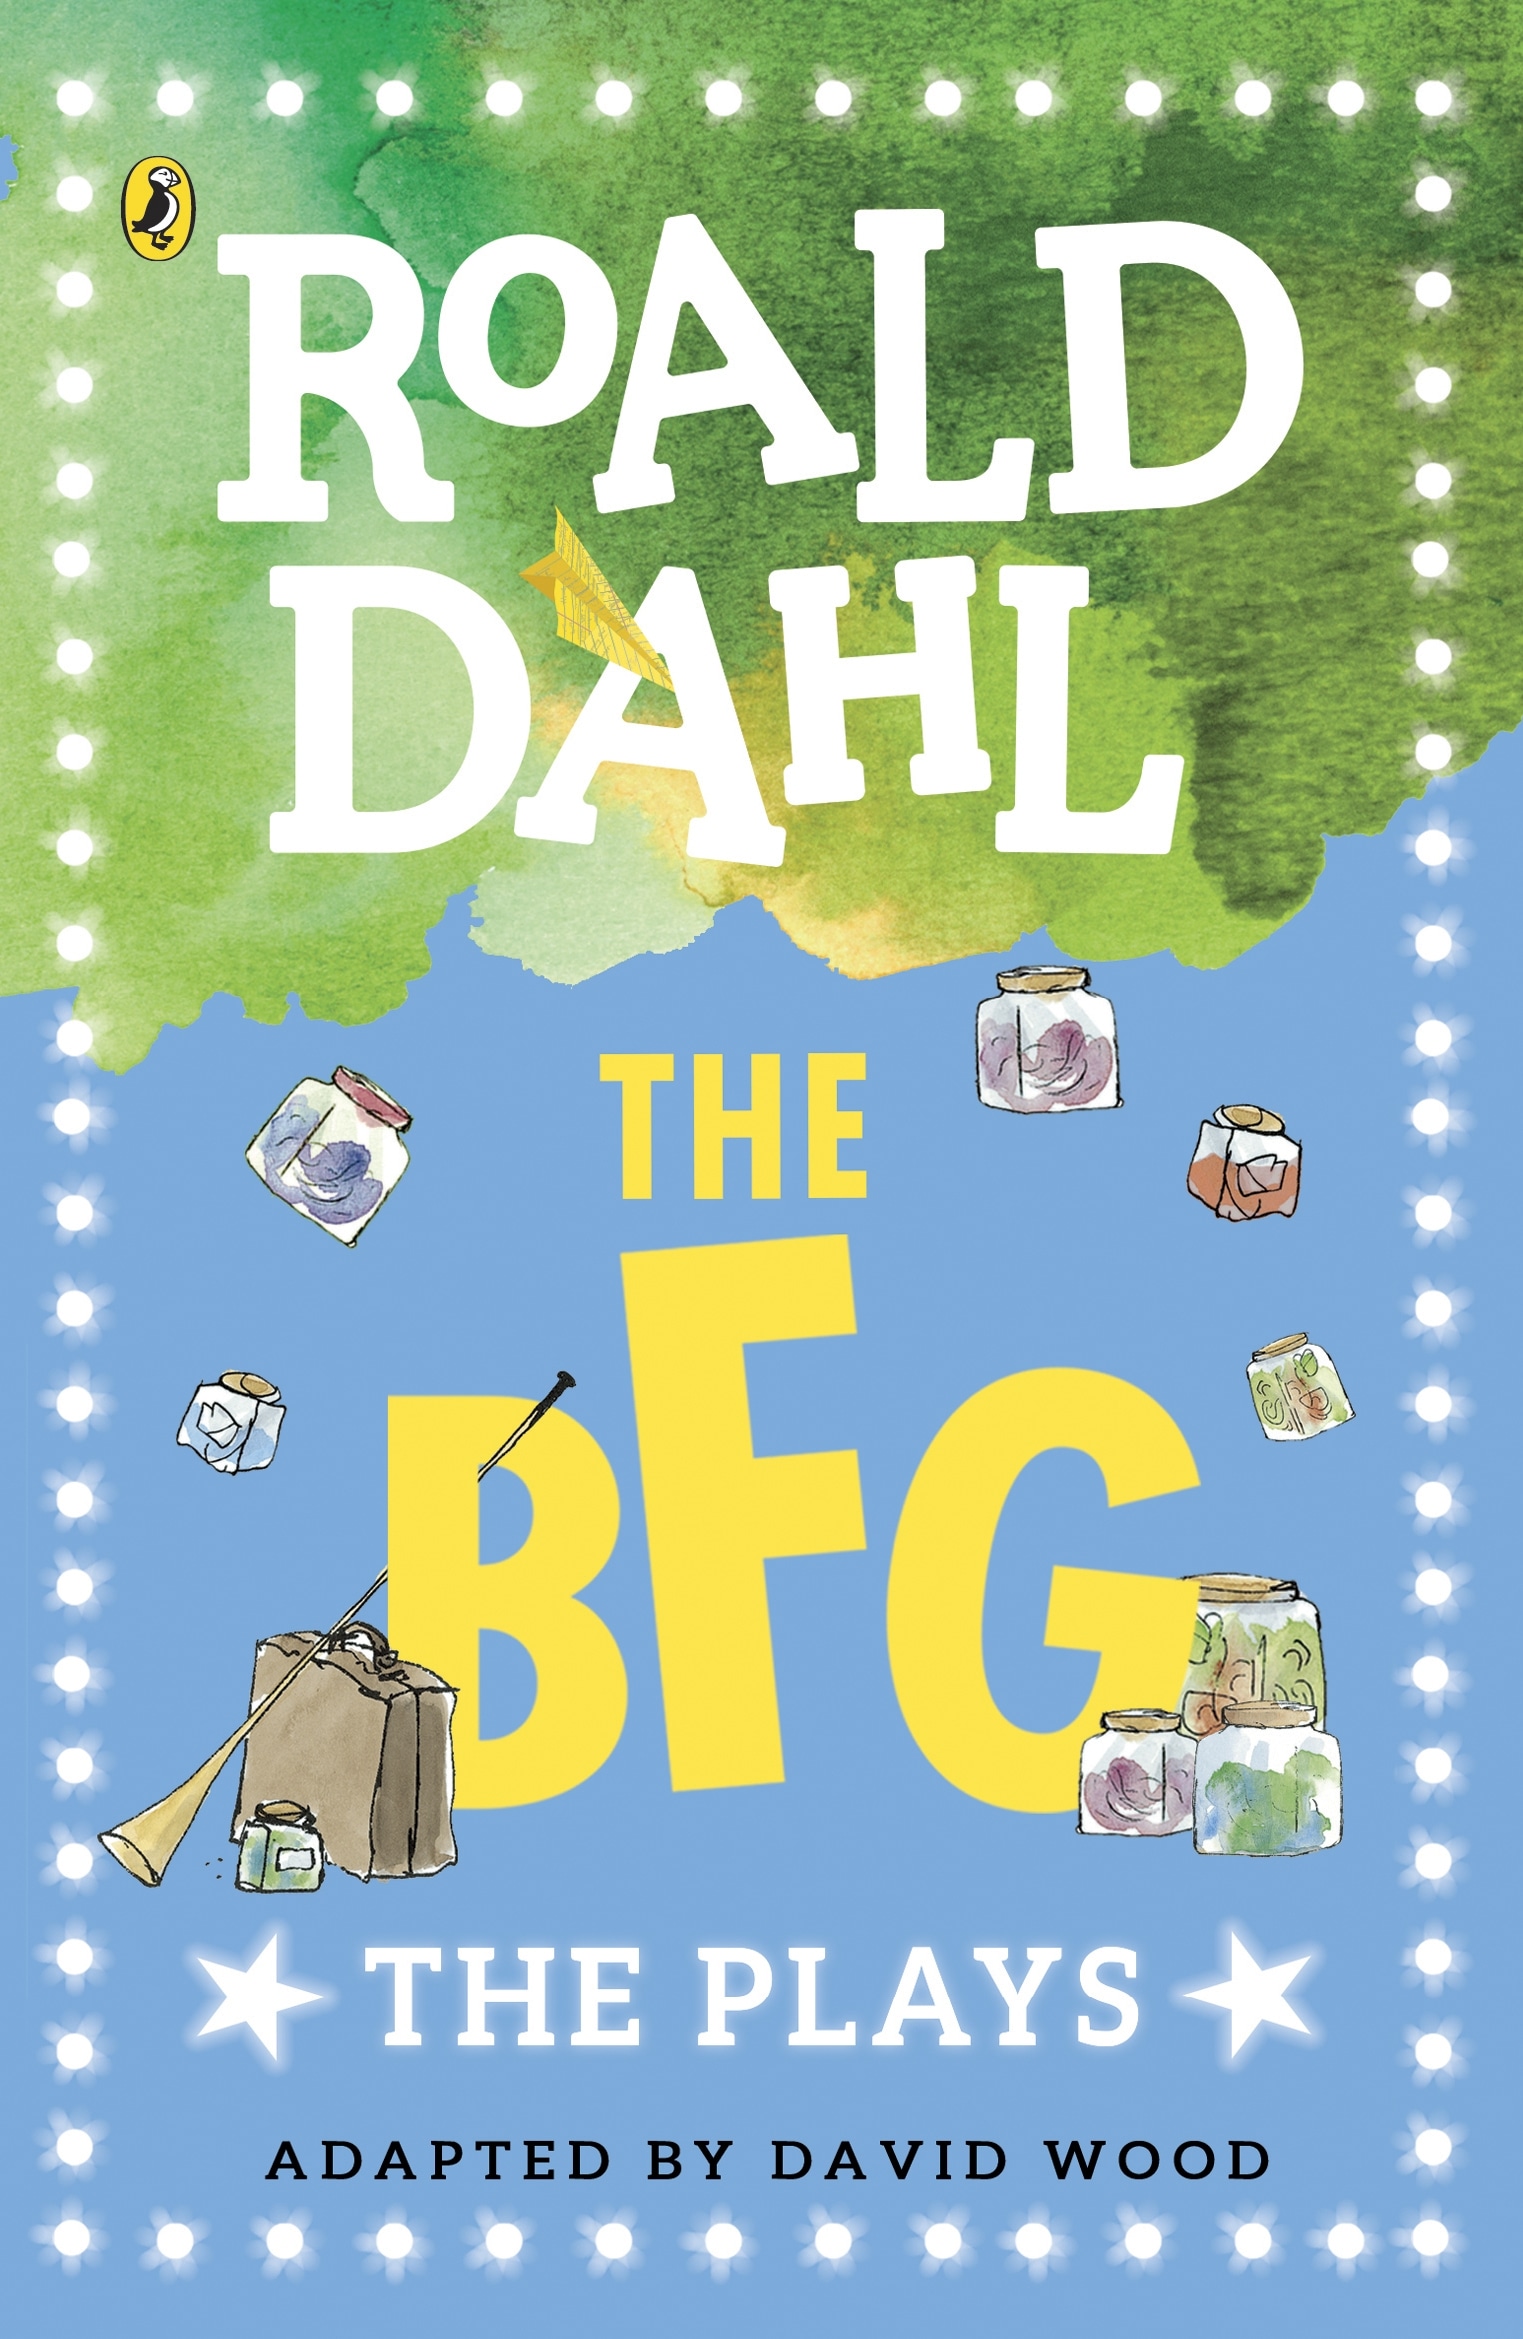 Book “The BFG” by Roald Dahl — August 3, 2017